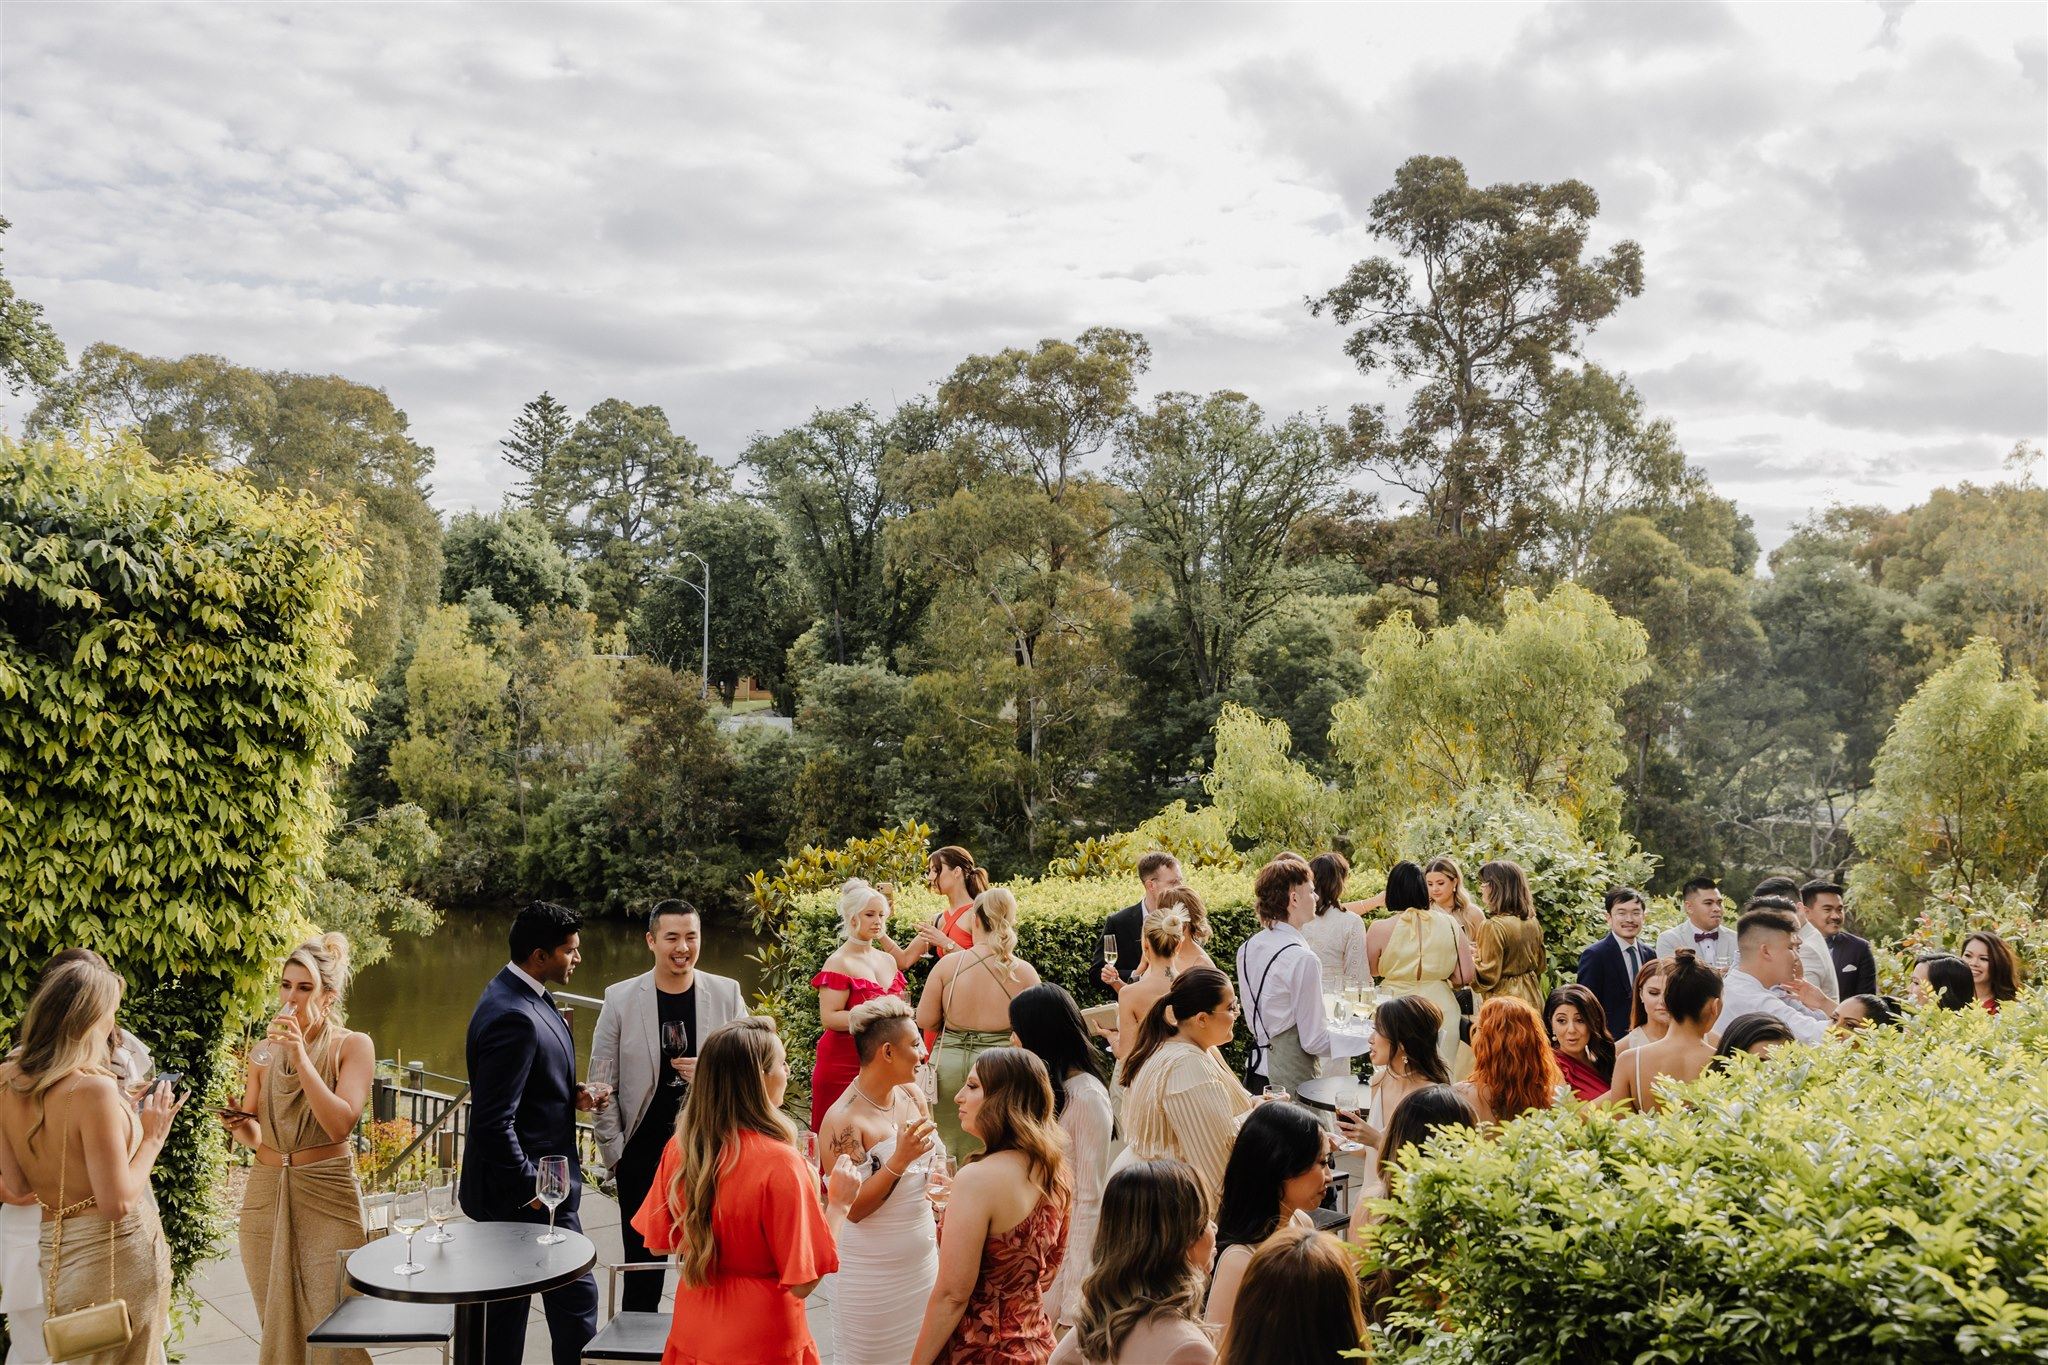 A summer setting of guests outdoors celebrating their valedictory at a Melbourne venue perfect for school events